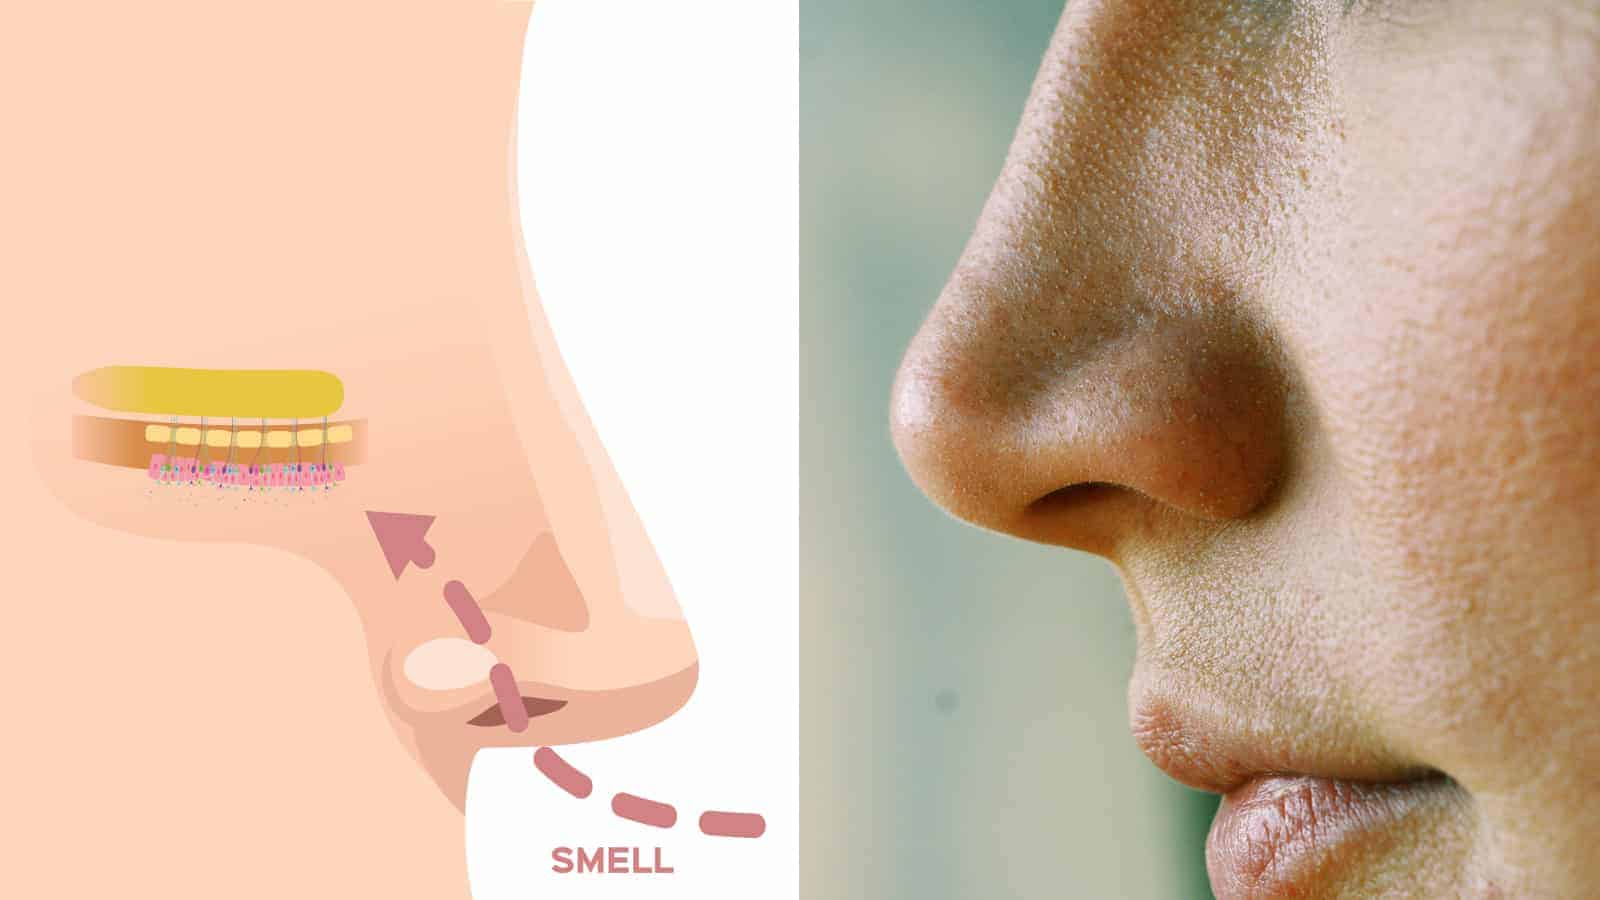 Researchers Reveal How Your Nose Can Smell Danger